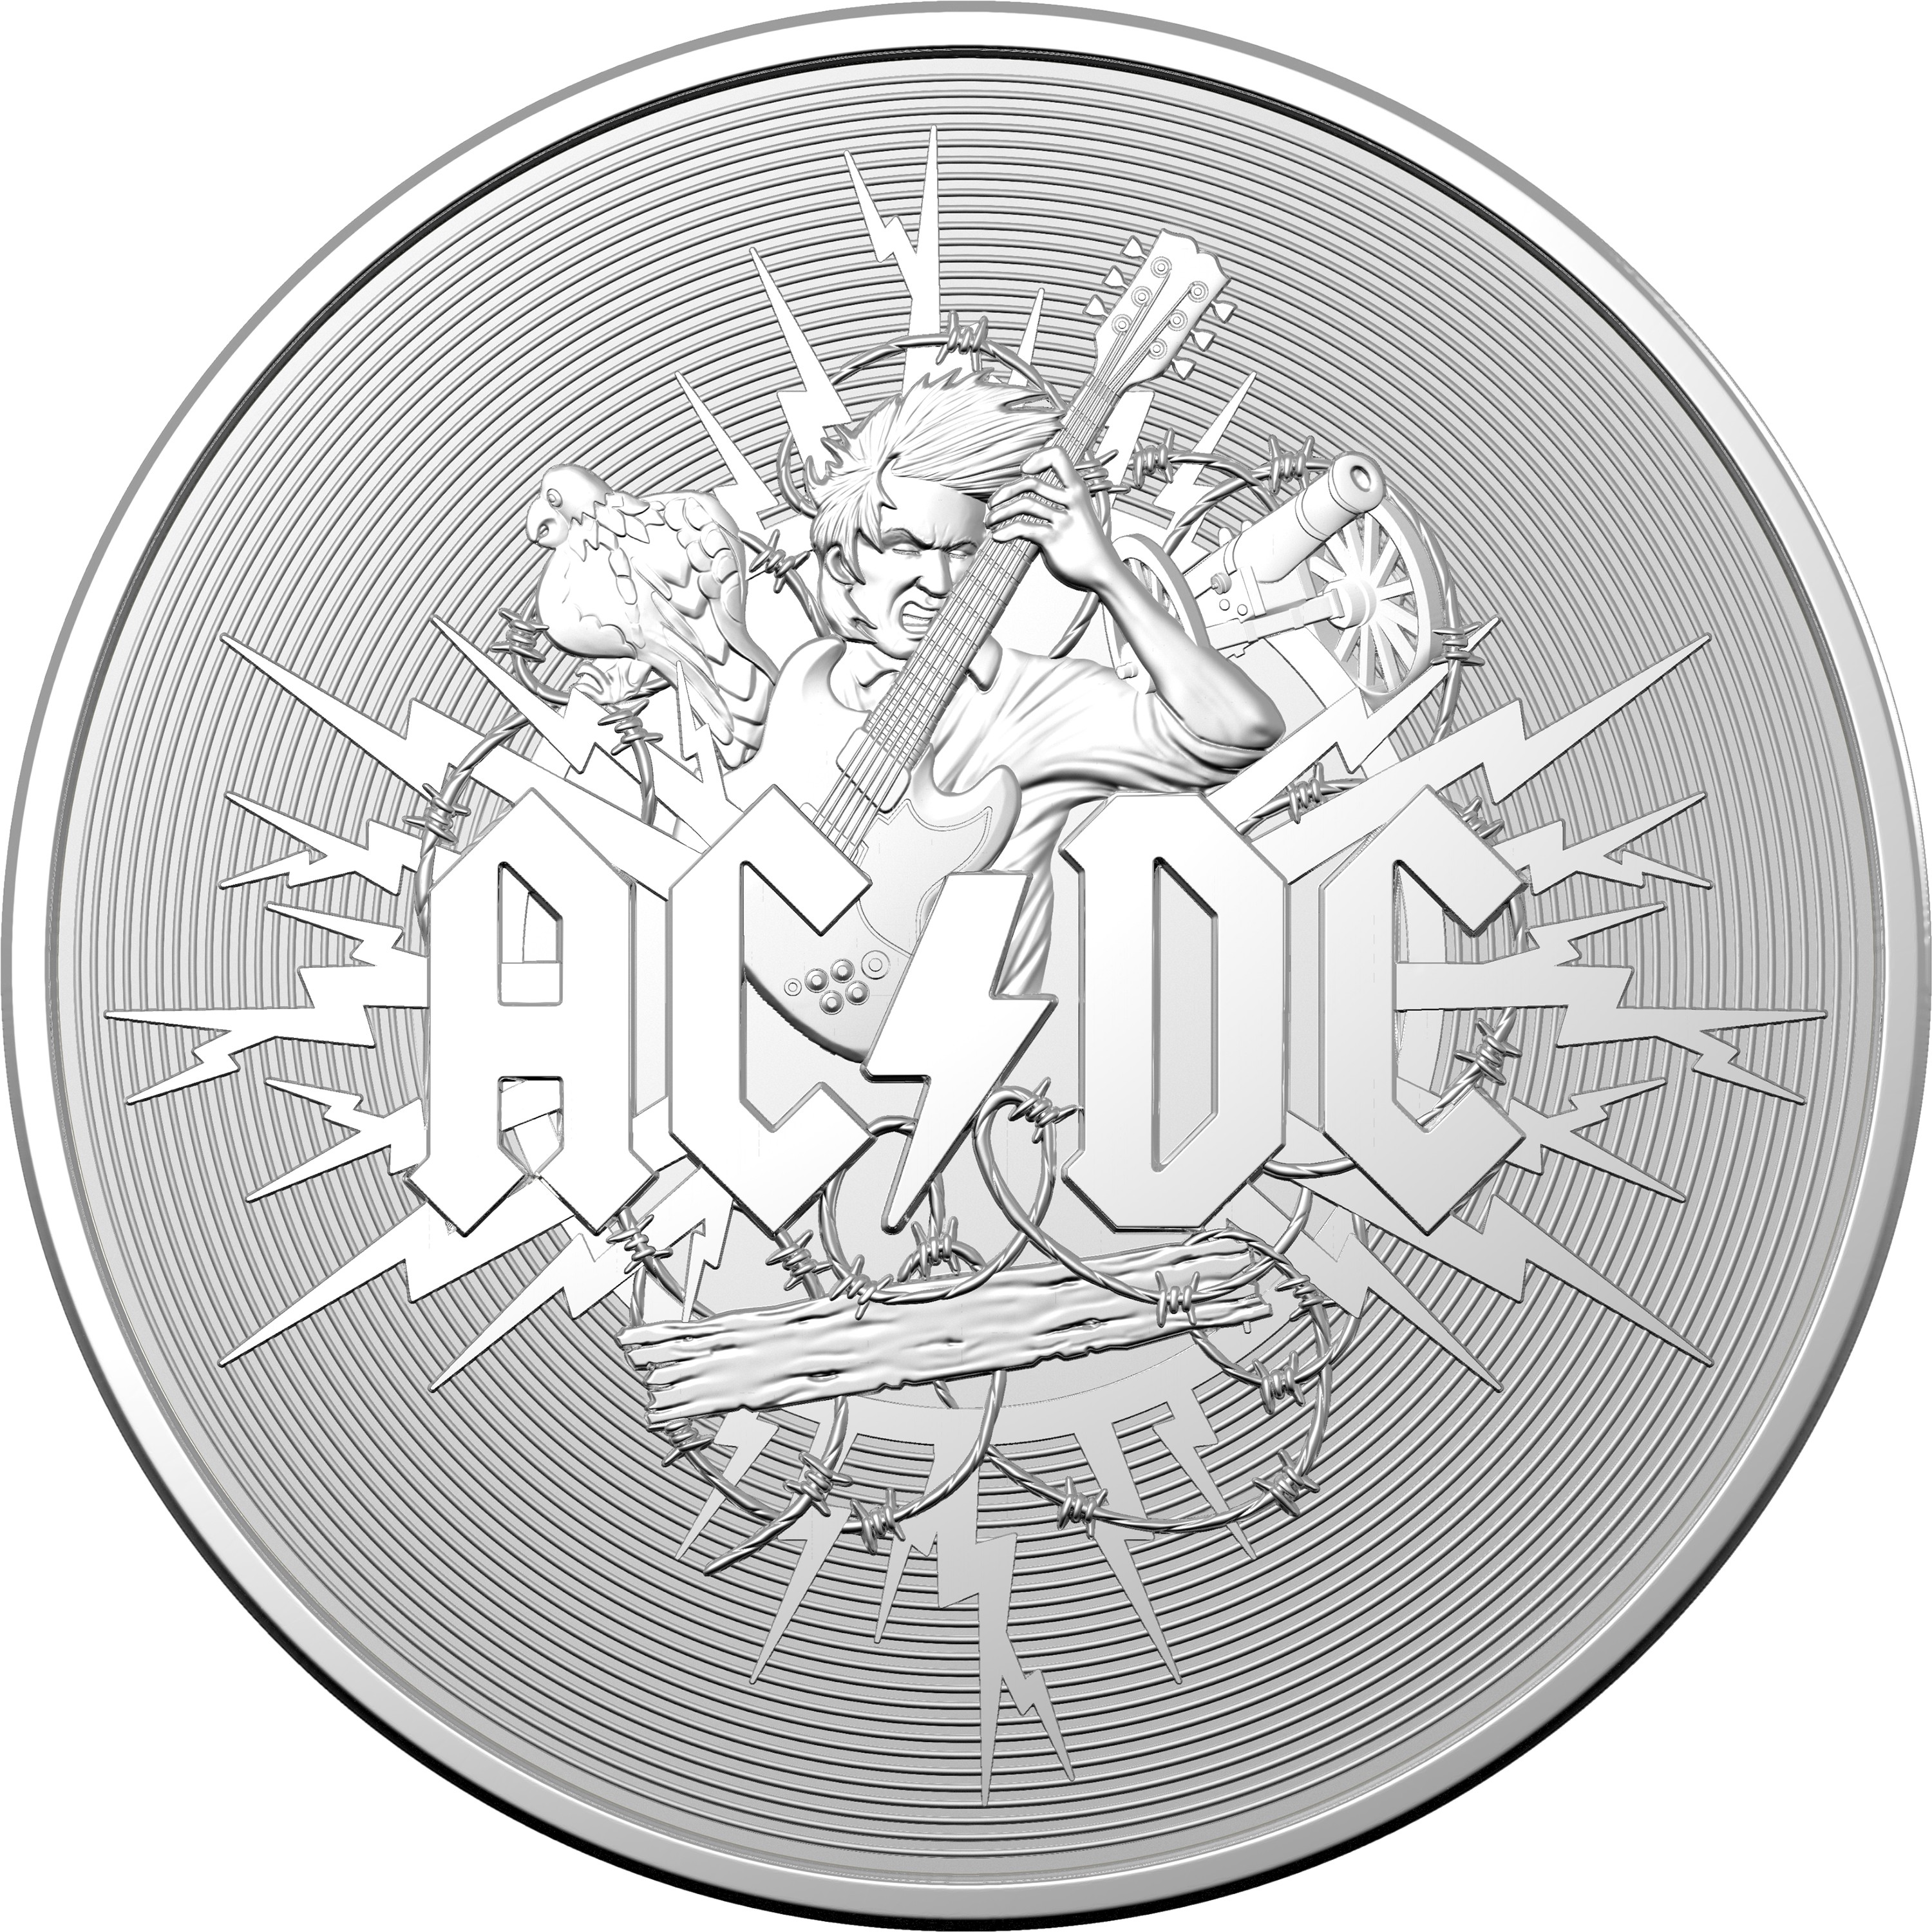 Electrifying coins to rock and roll as salute to AC/DC